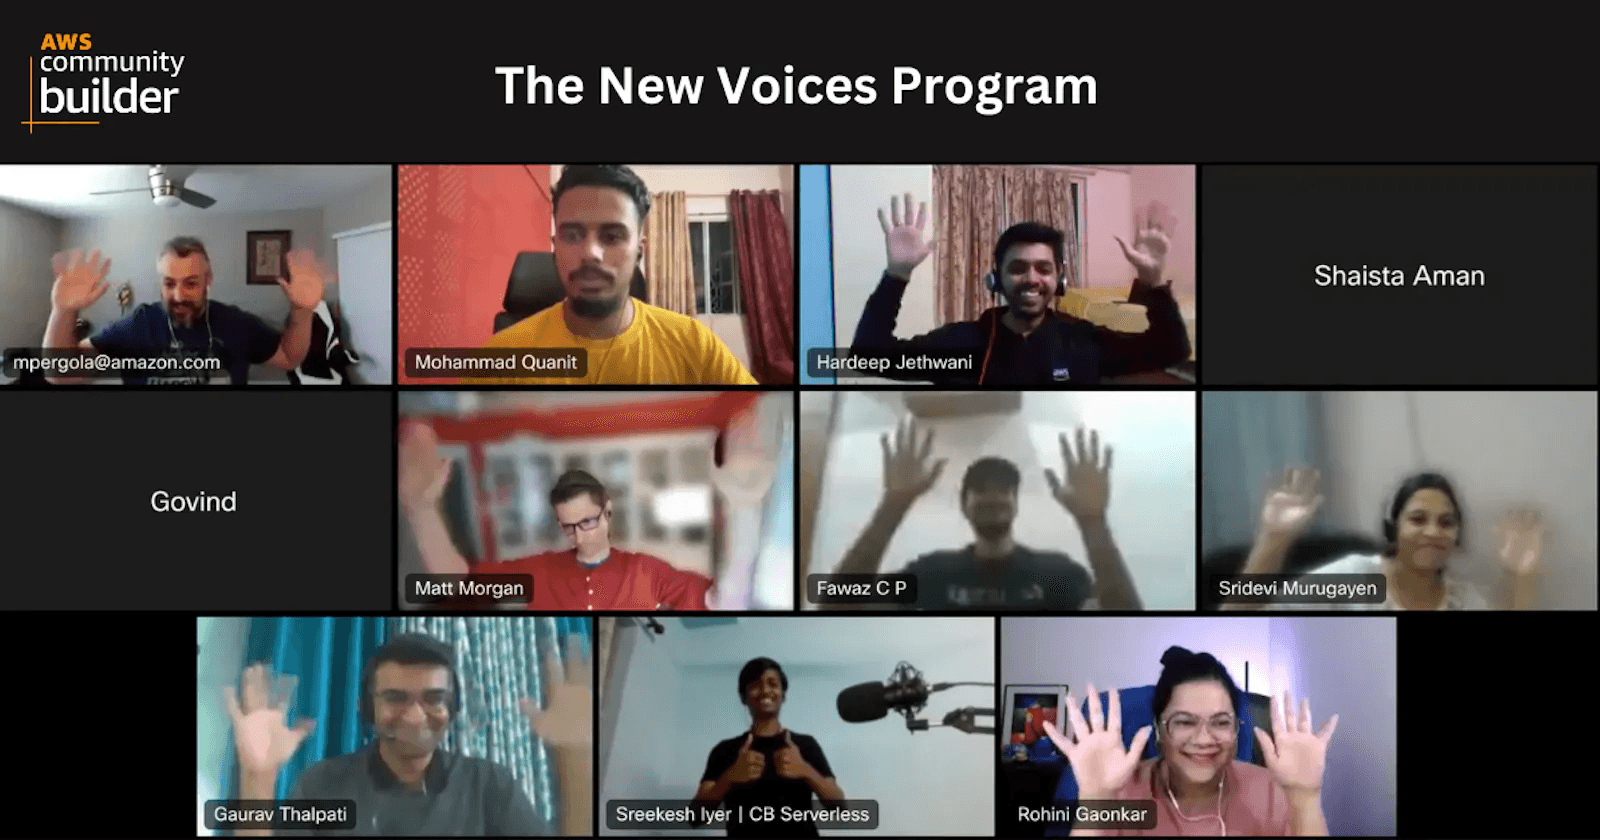 My experience with the AWS Community 'New Voices' Program